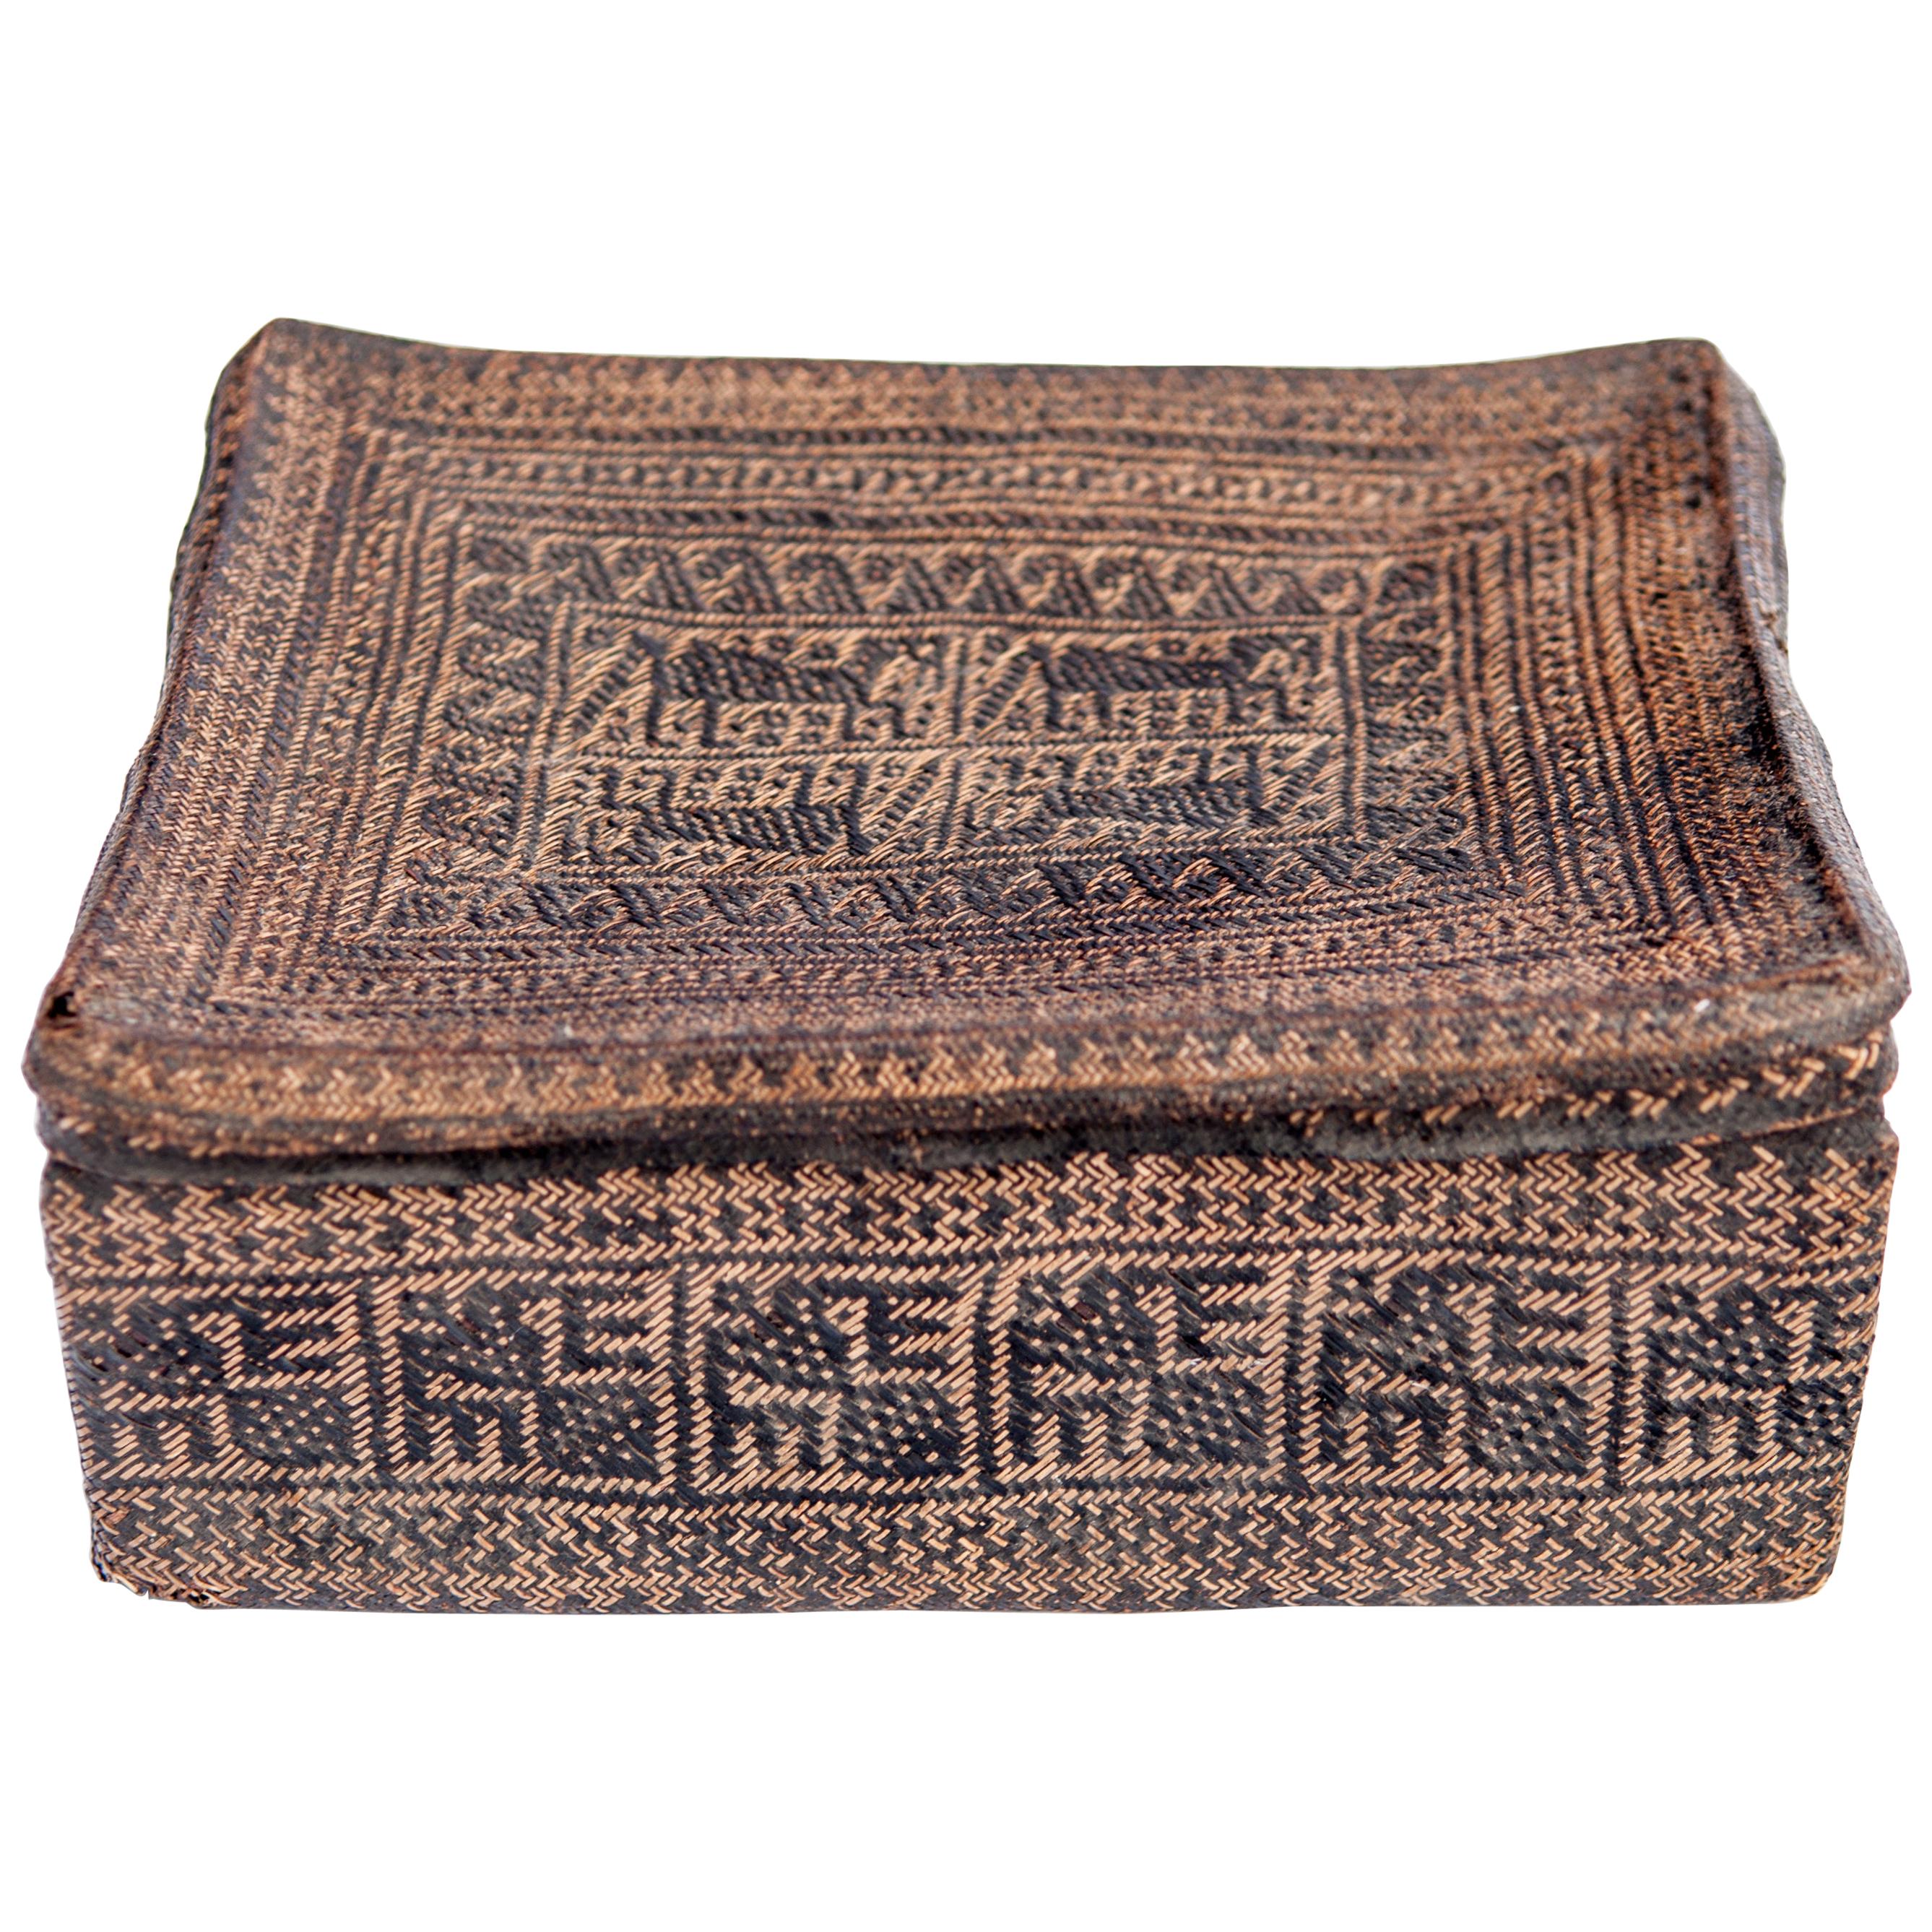 Betel Basket with Woven Design, Lampung, Sumatra Late 19th to Early 20th Century